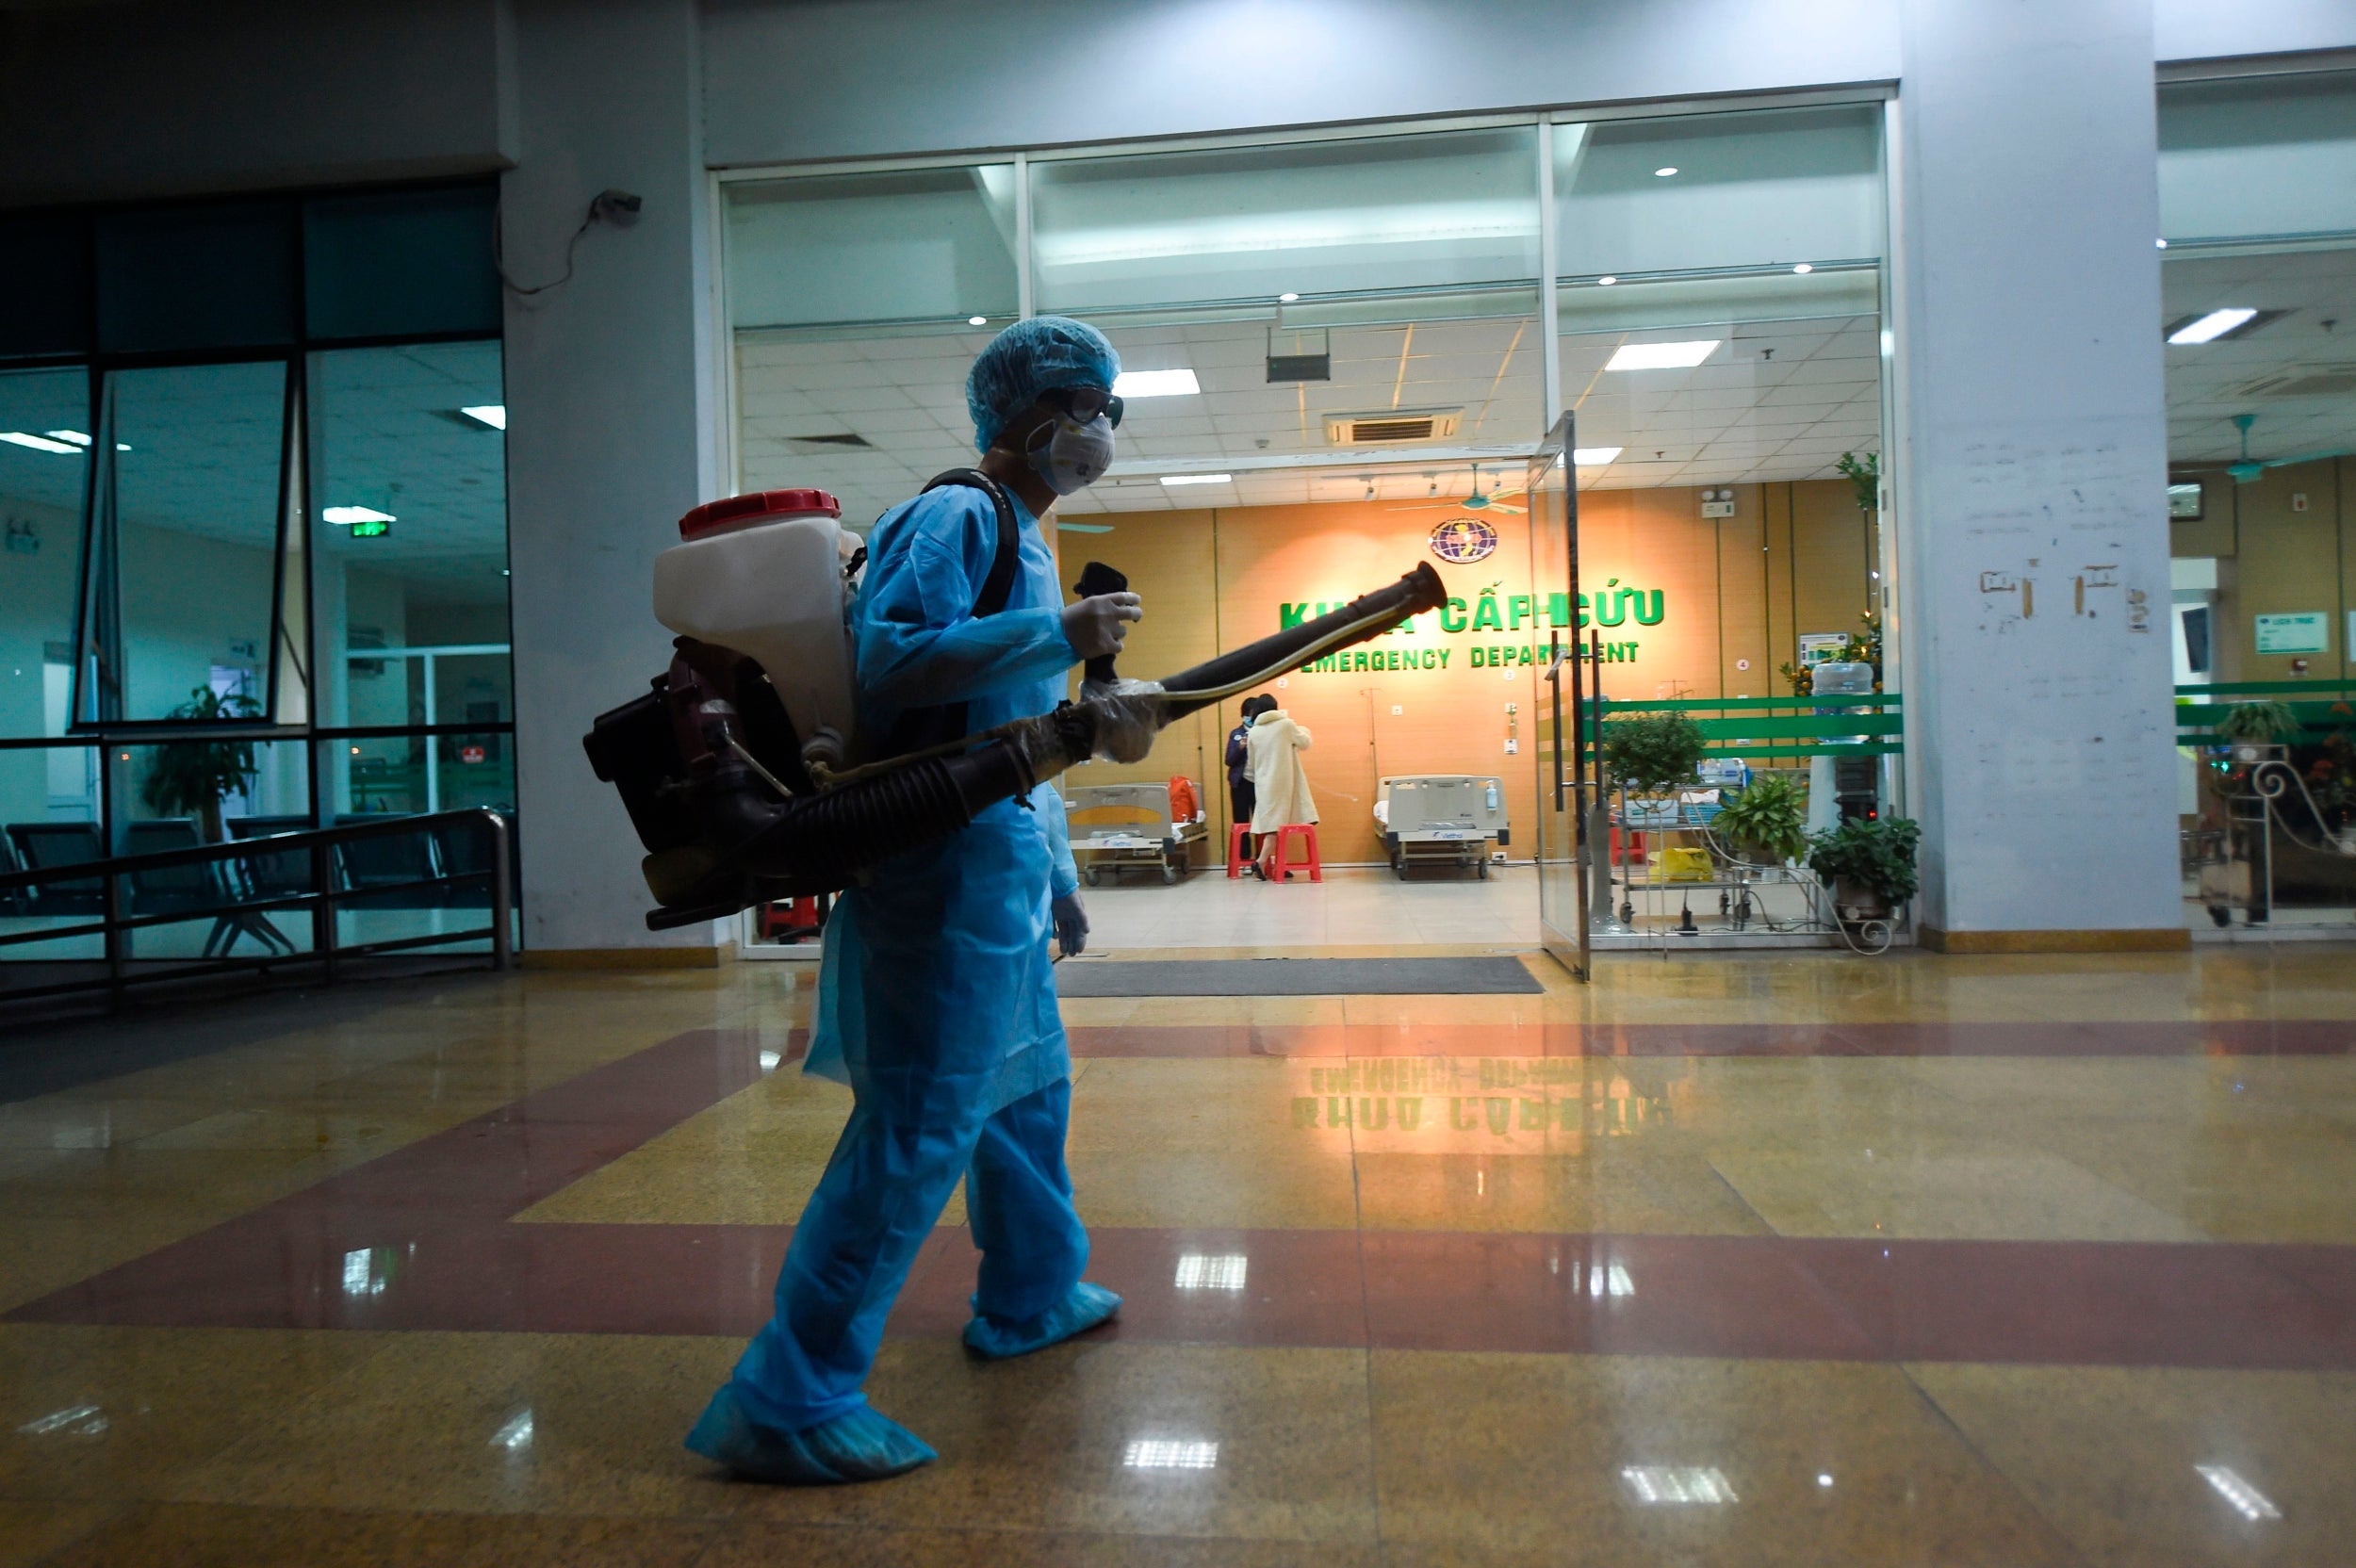 Vietnam was quick to implement new rules when the coronavirus pandemic began